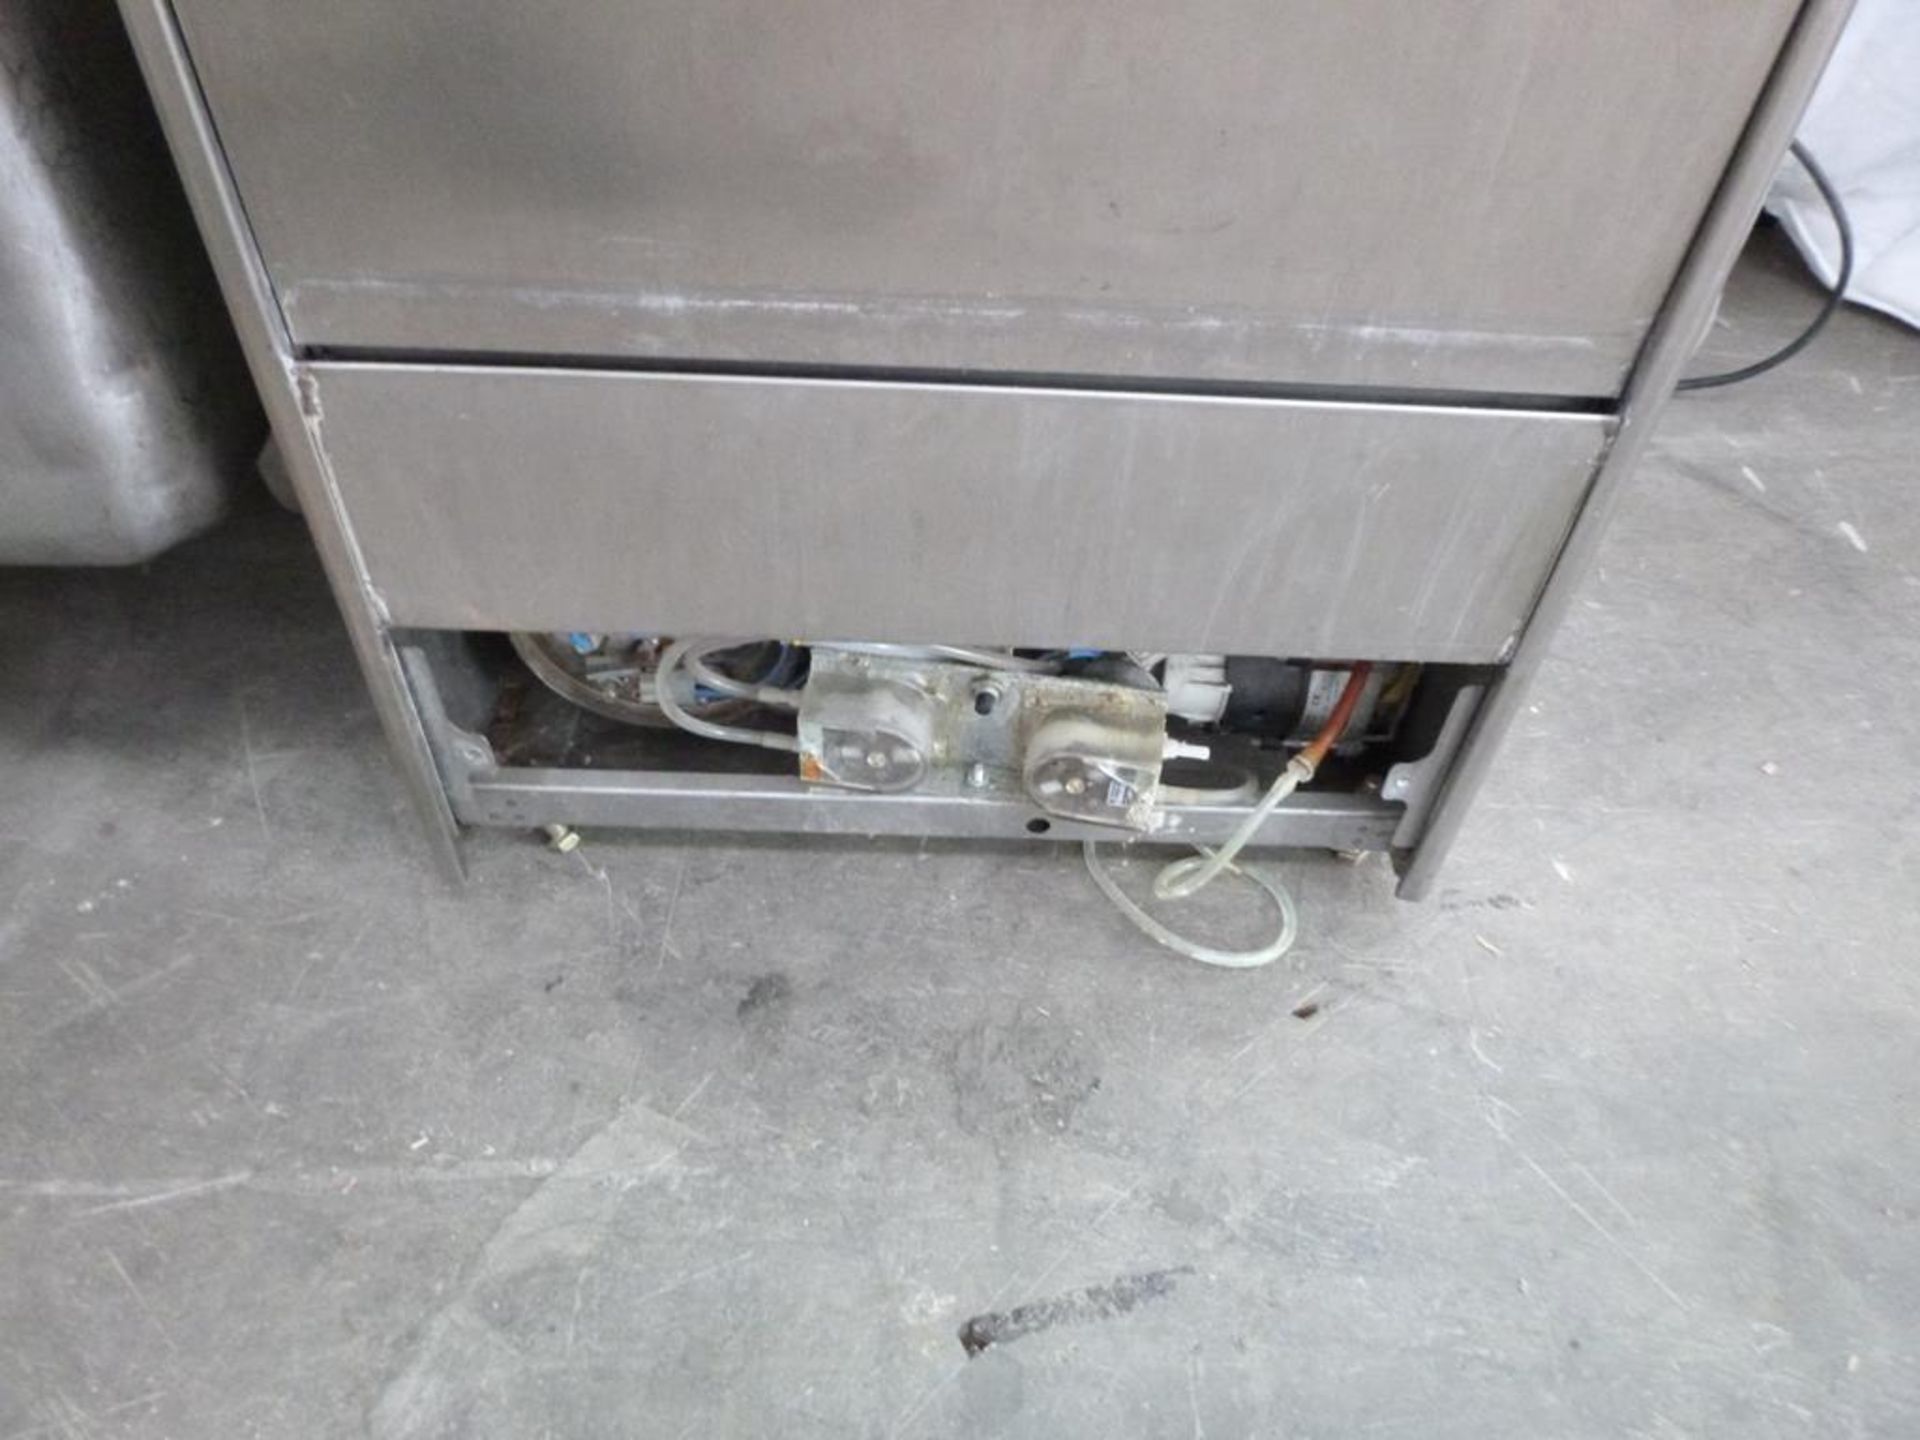 A Classic Duo 2 Stainless Steel Glass Washer - Image 2 of 2